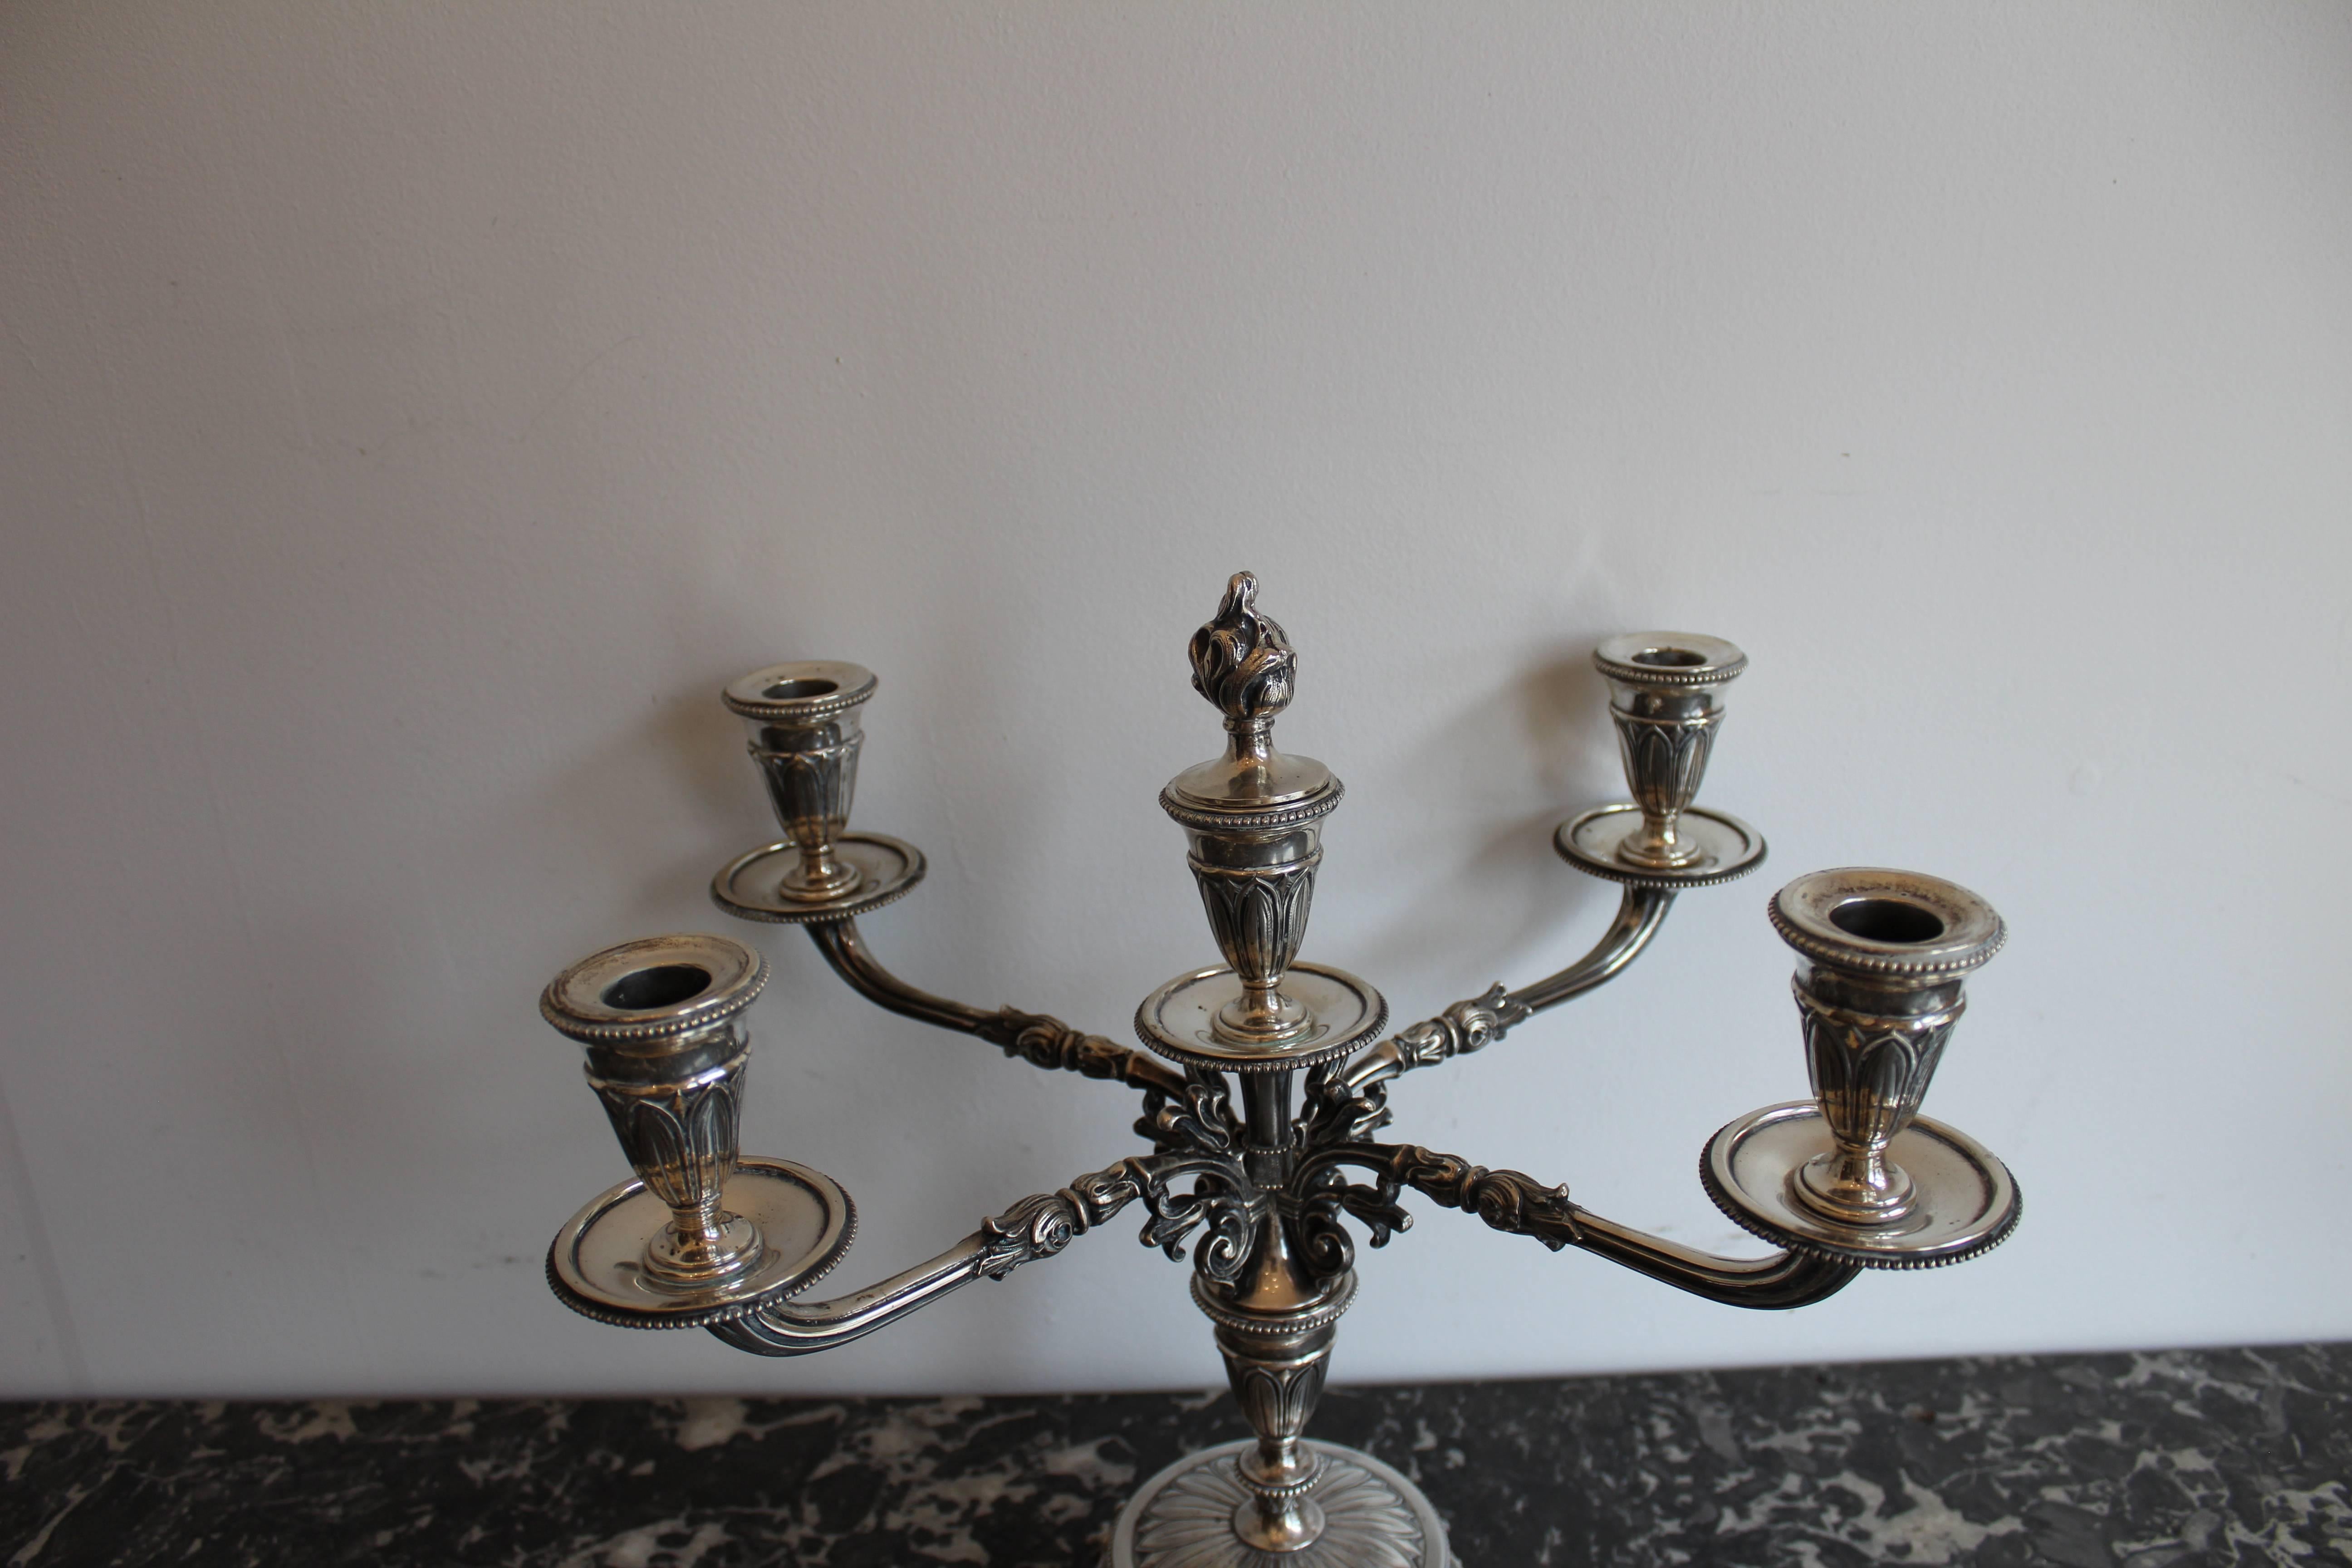 Pair of 19th century Continental silver candelabra. Weight: Just under four kilograms.